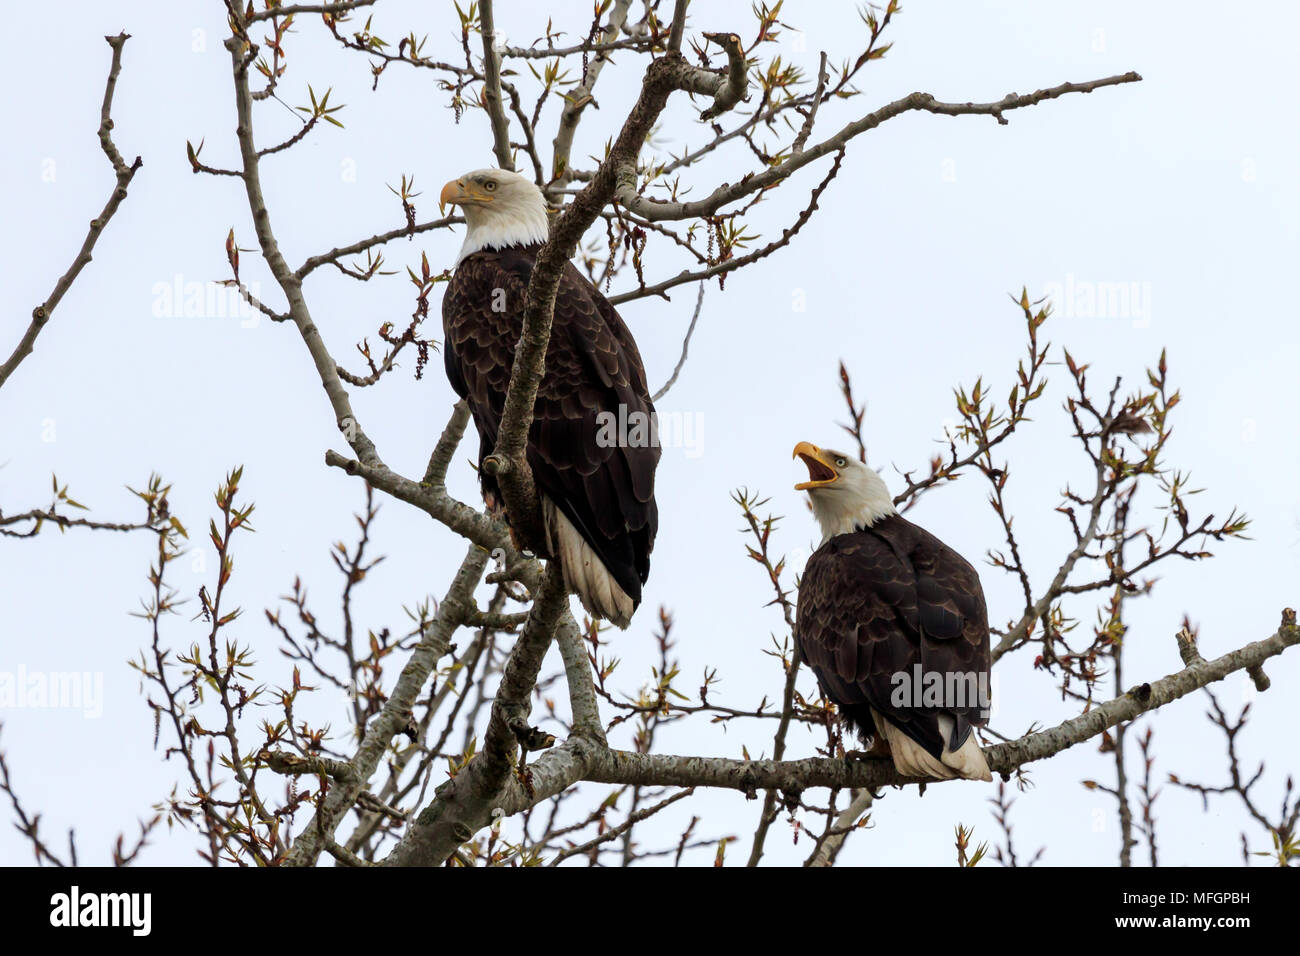 Pair of Bald Eagles perched on tree branches Stock Photo